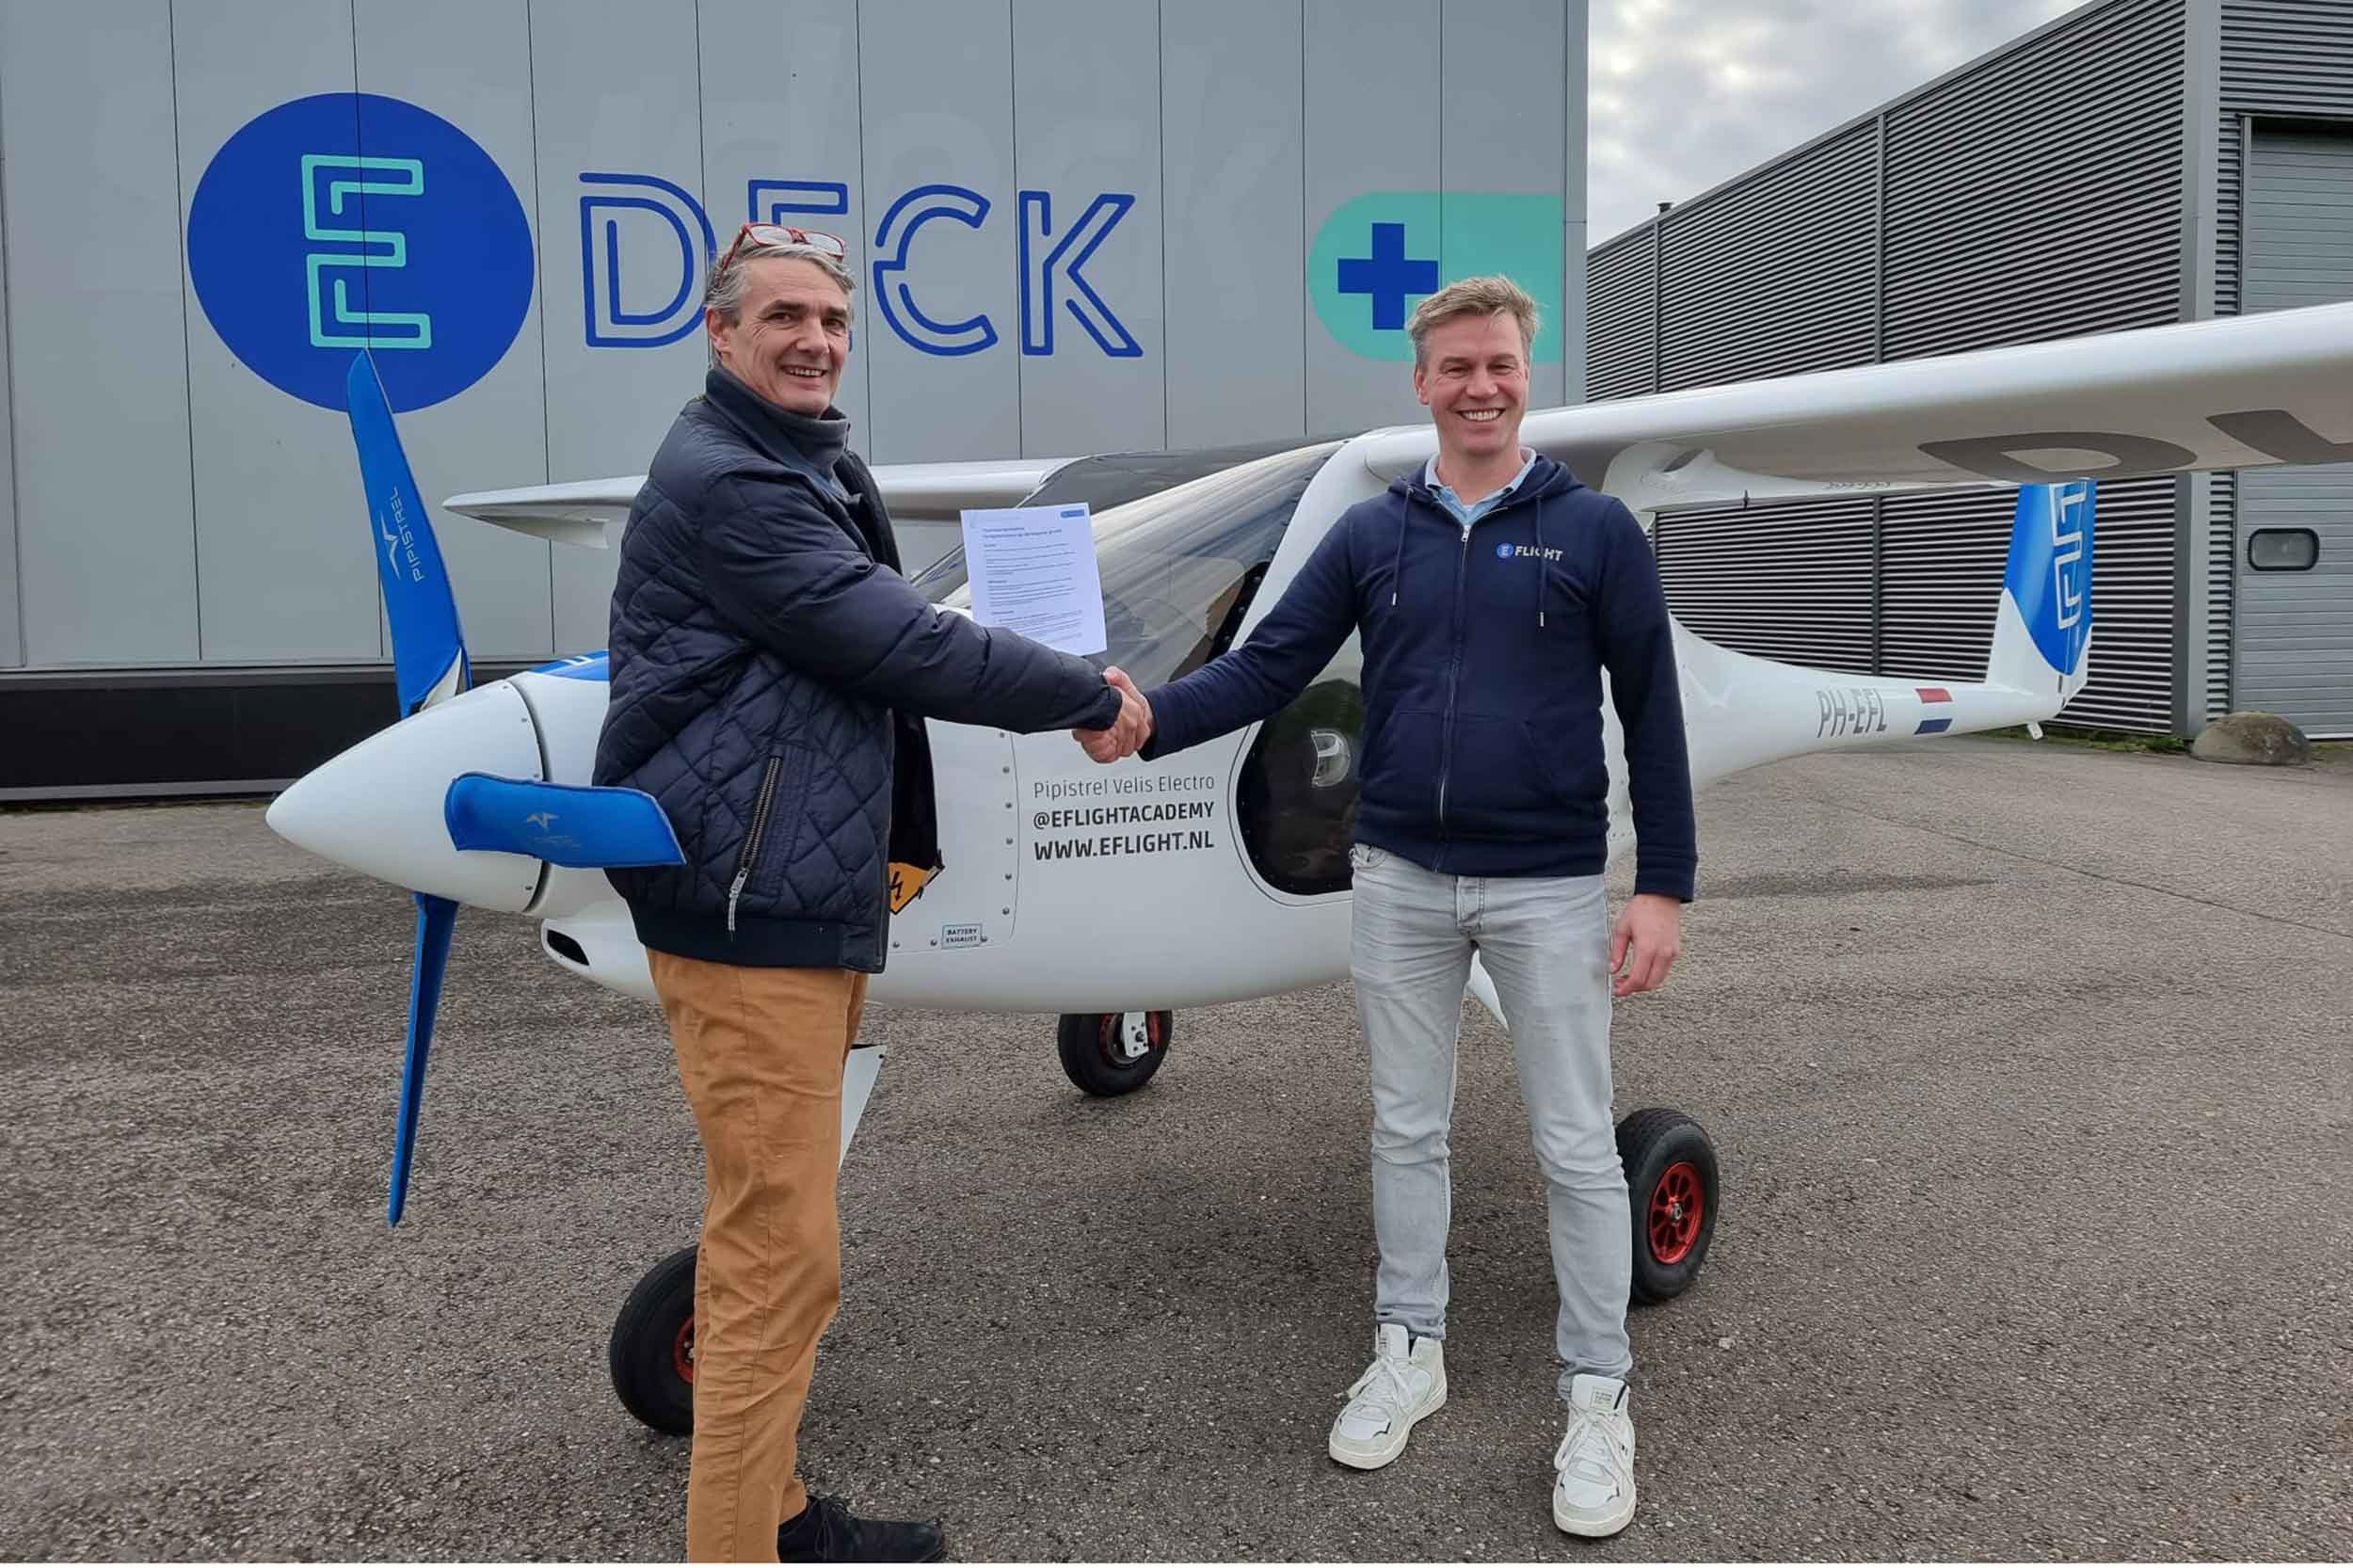 Cormorant's Chris Rijff, left, with Ed-Deck's Evert Jan at Teuge Airport